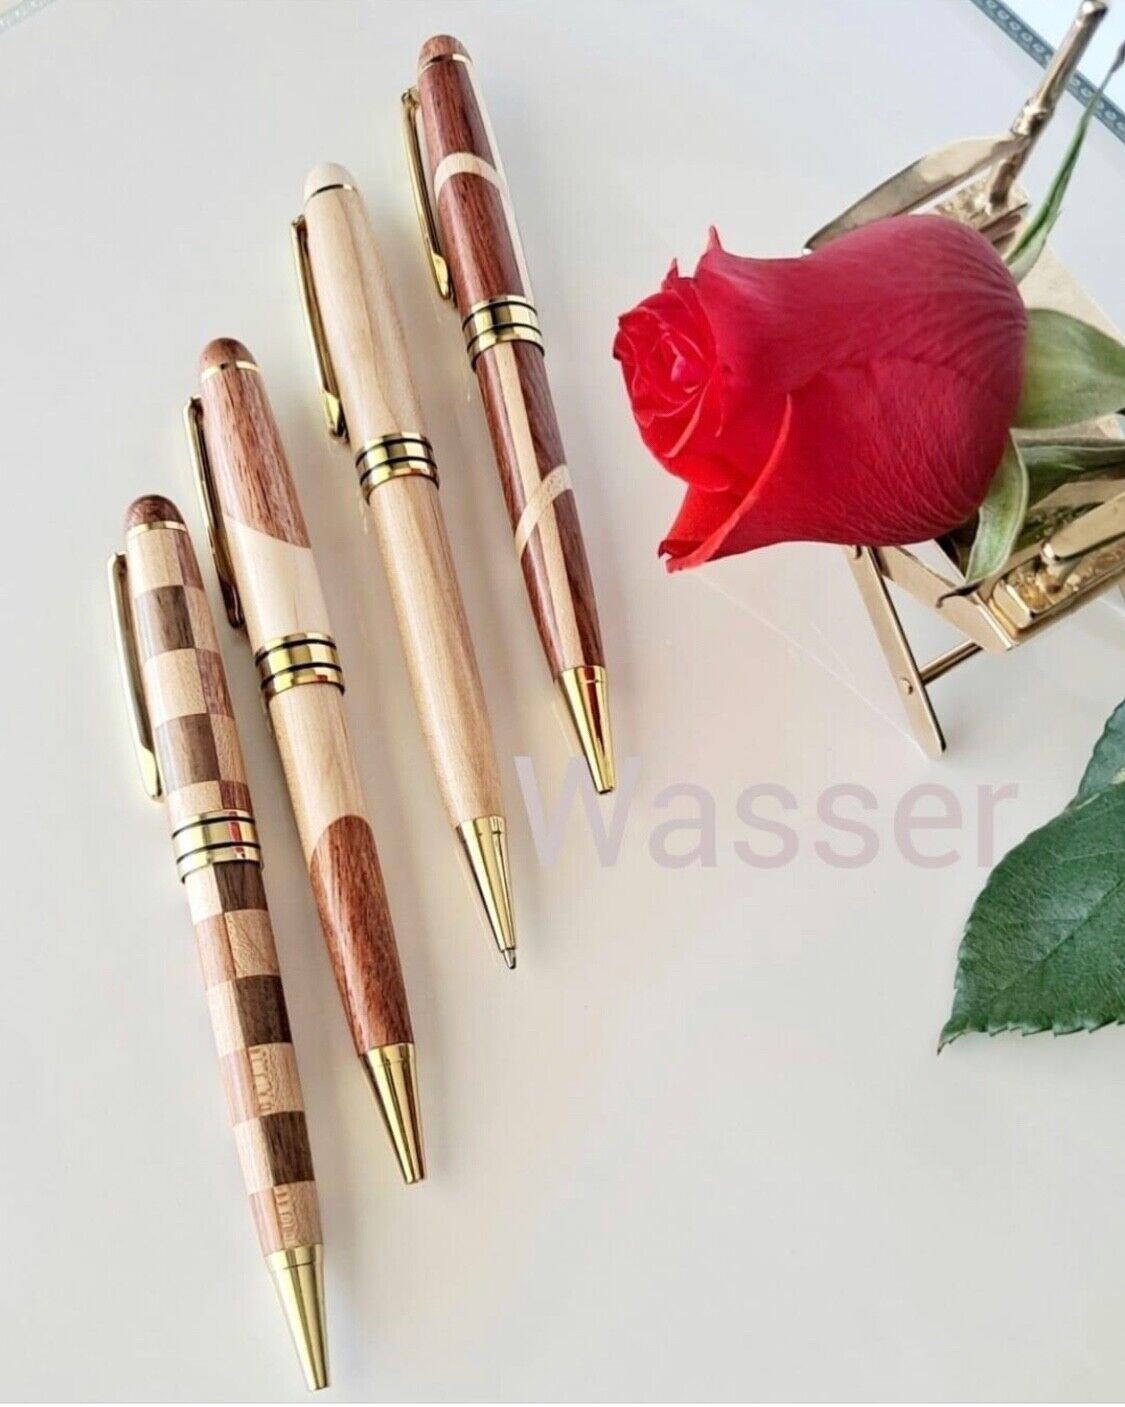 Hand crafted wooden Slimline Pen made from Maple Wood